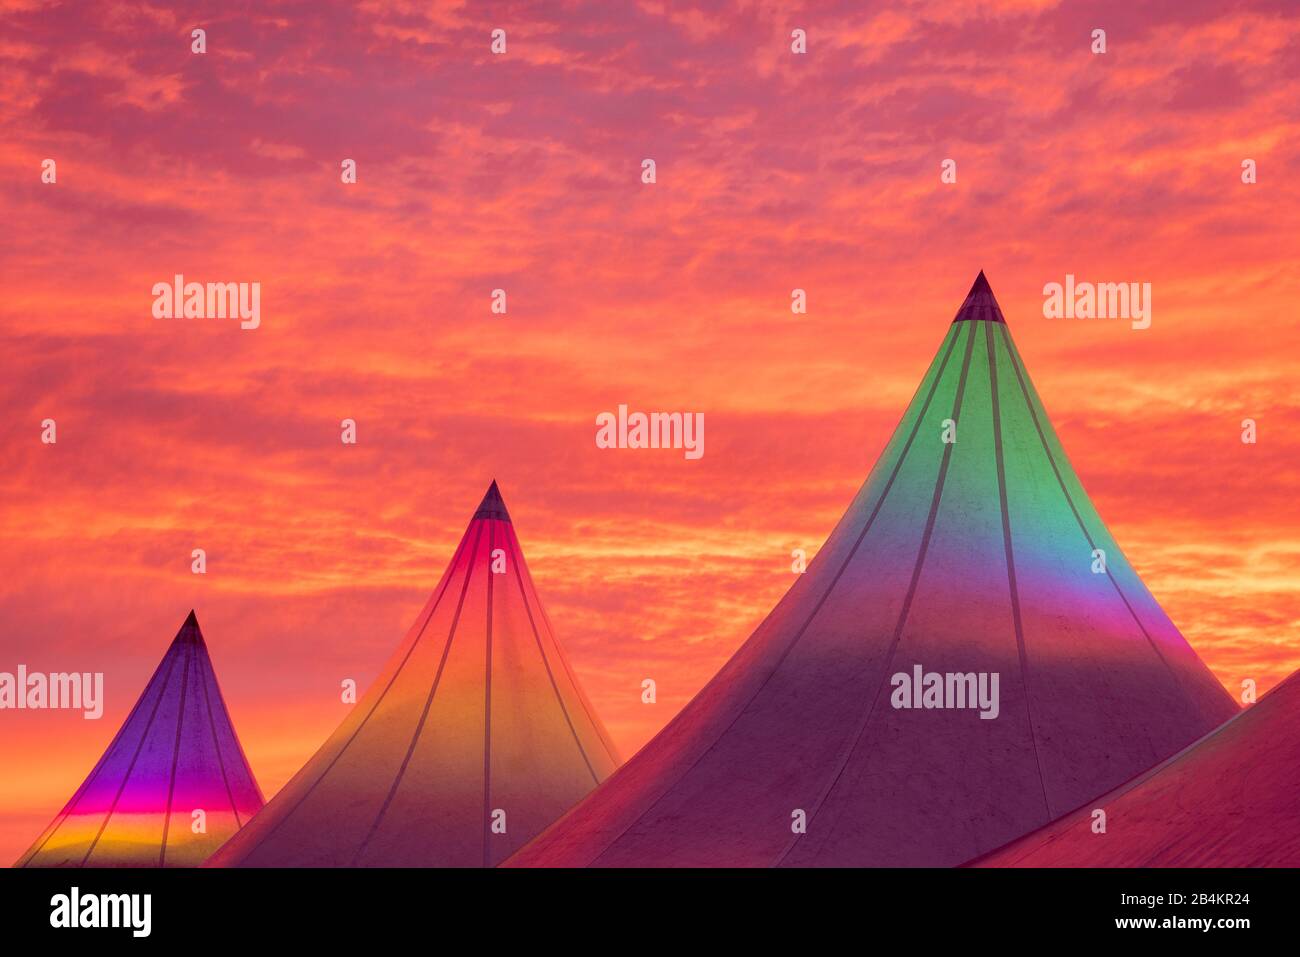 Tents, red sky, sunrise, color explosion. Stock Photo